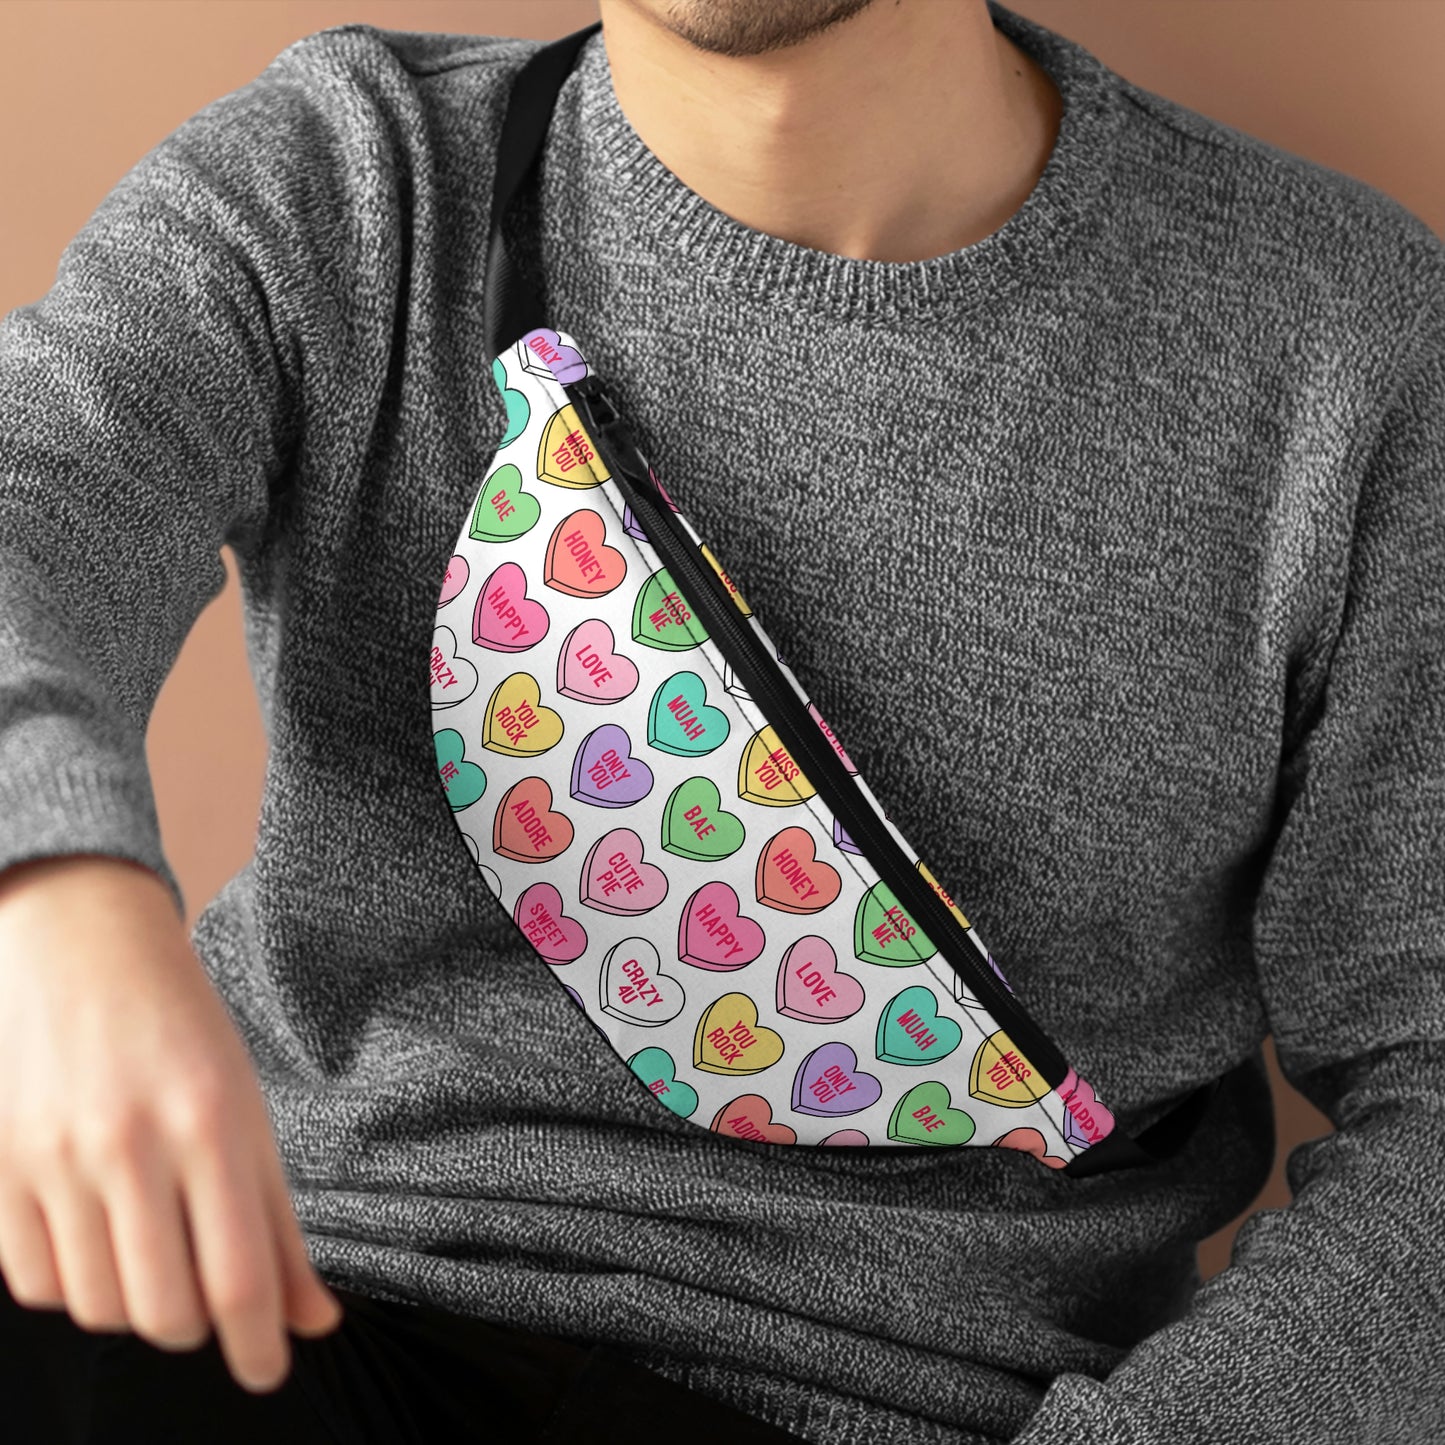 Candy Conversation Hearts Fanny Pack